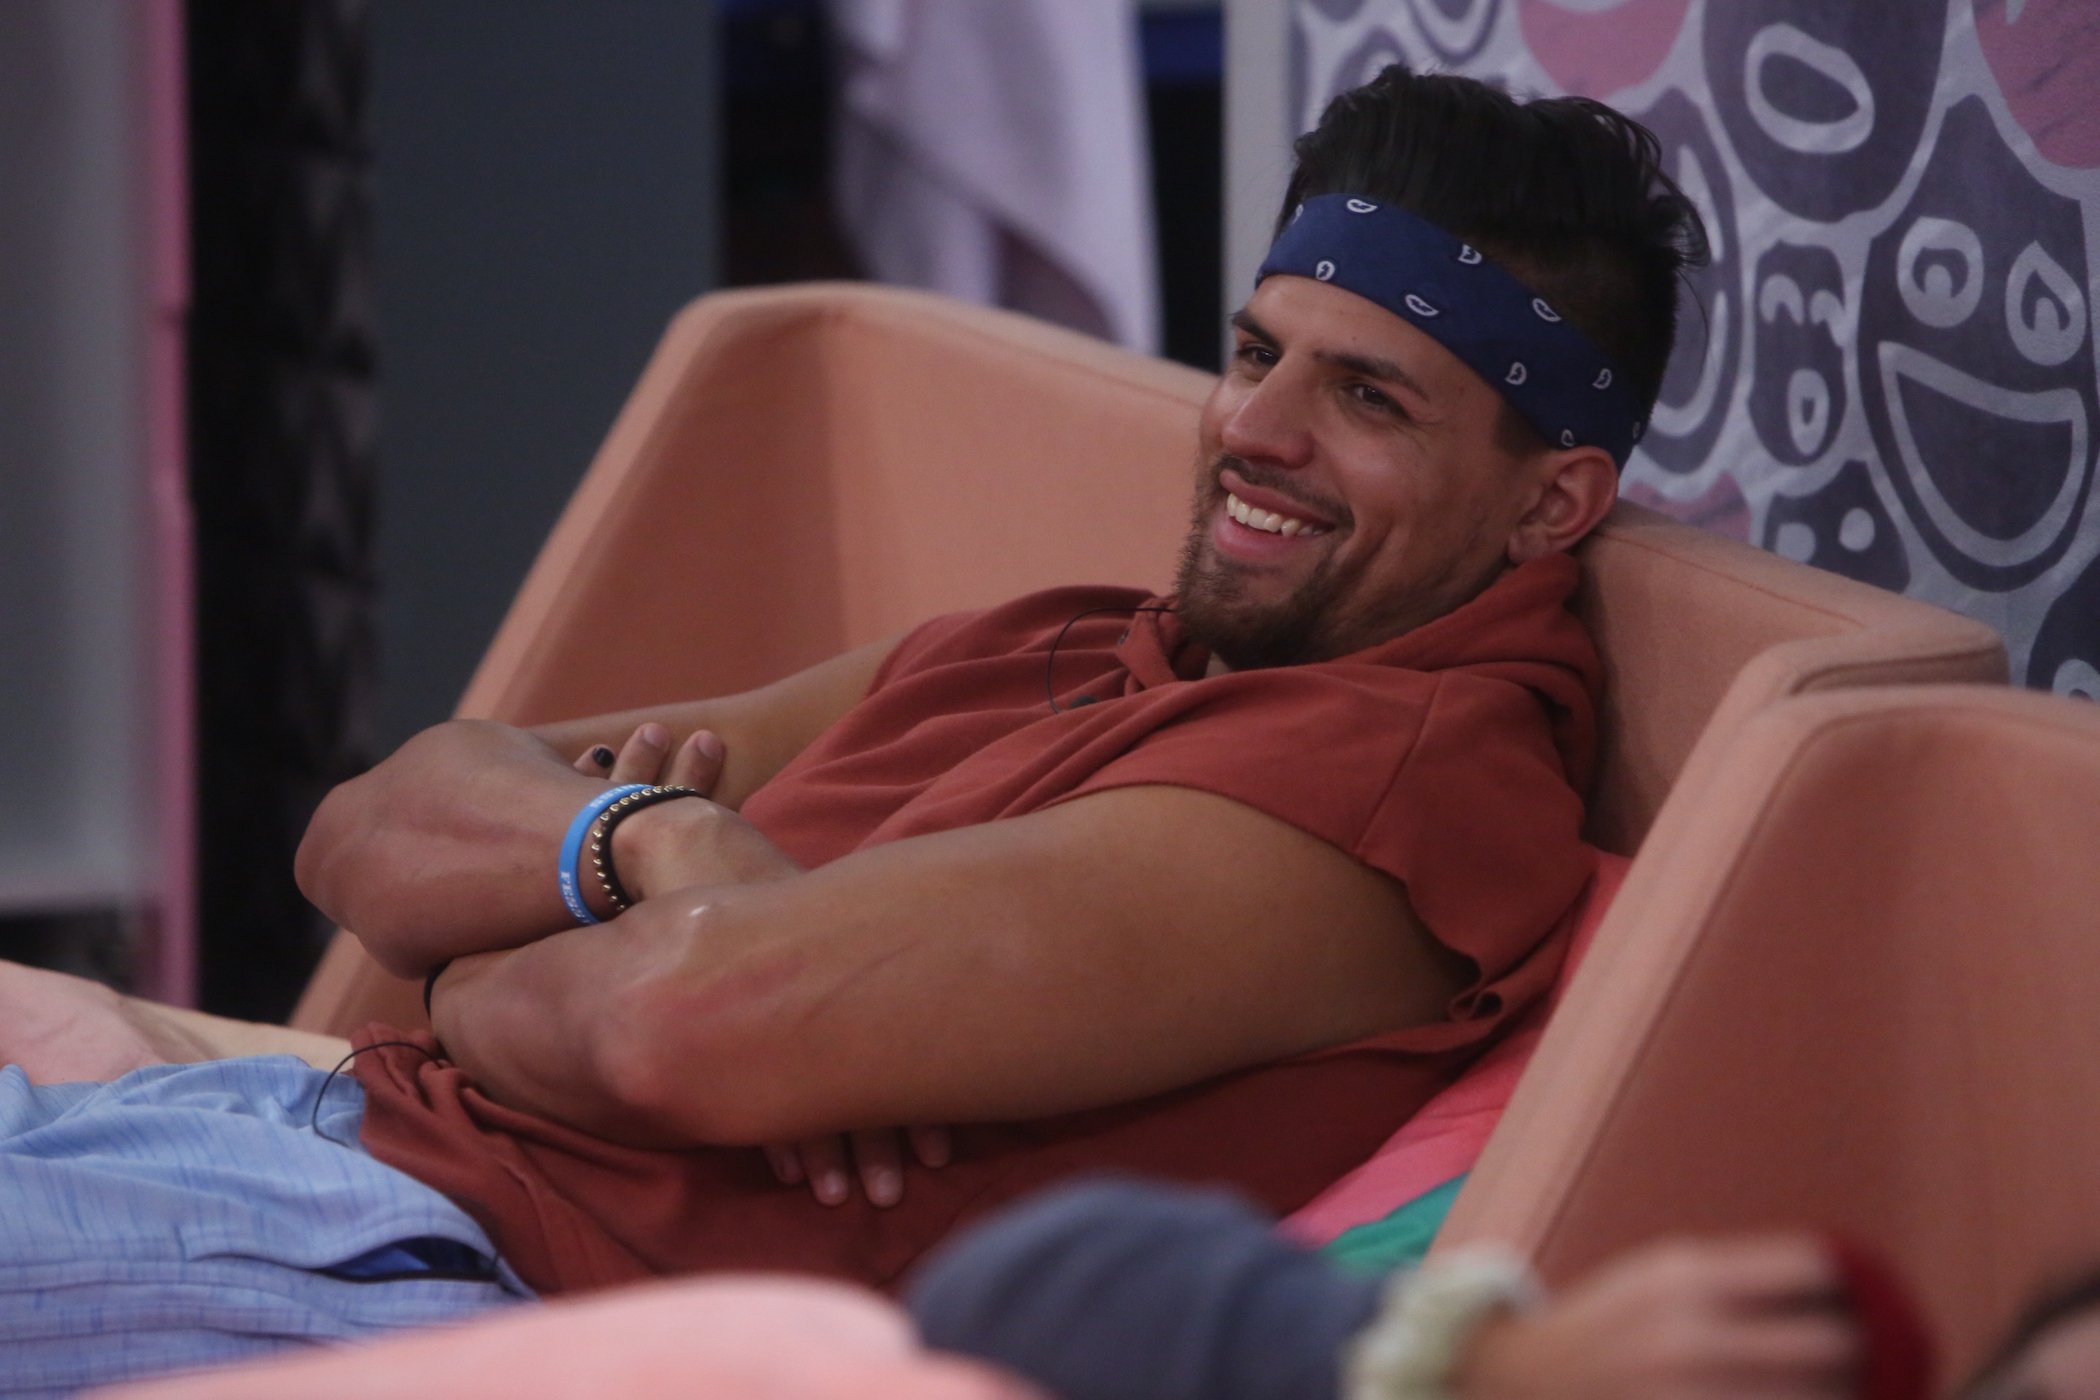 Fessy Shafaat from MTV's 'The Challenge' Season 37 sitting on a couch and laughing